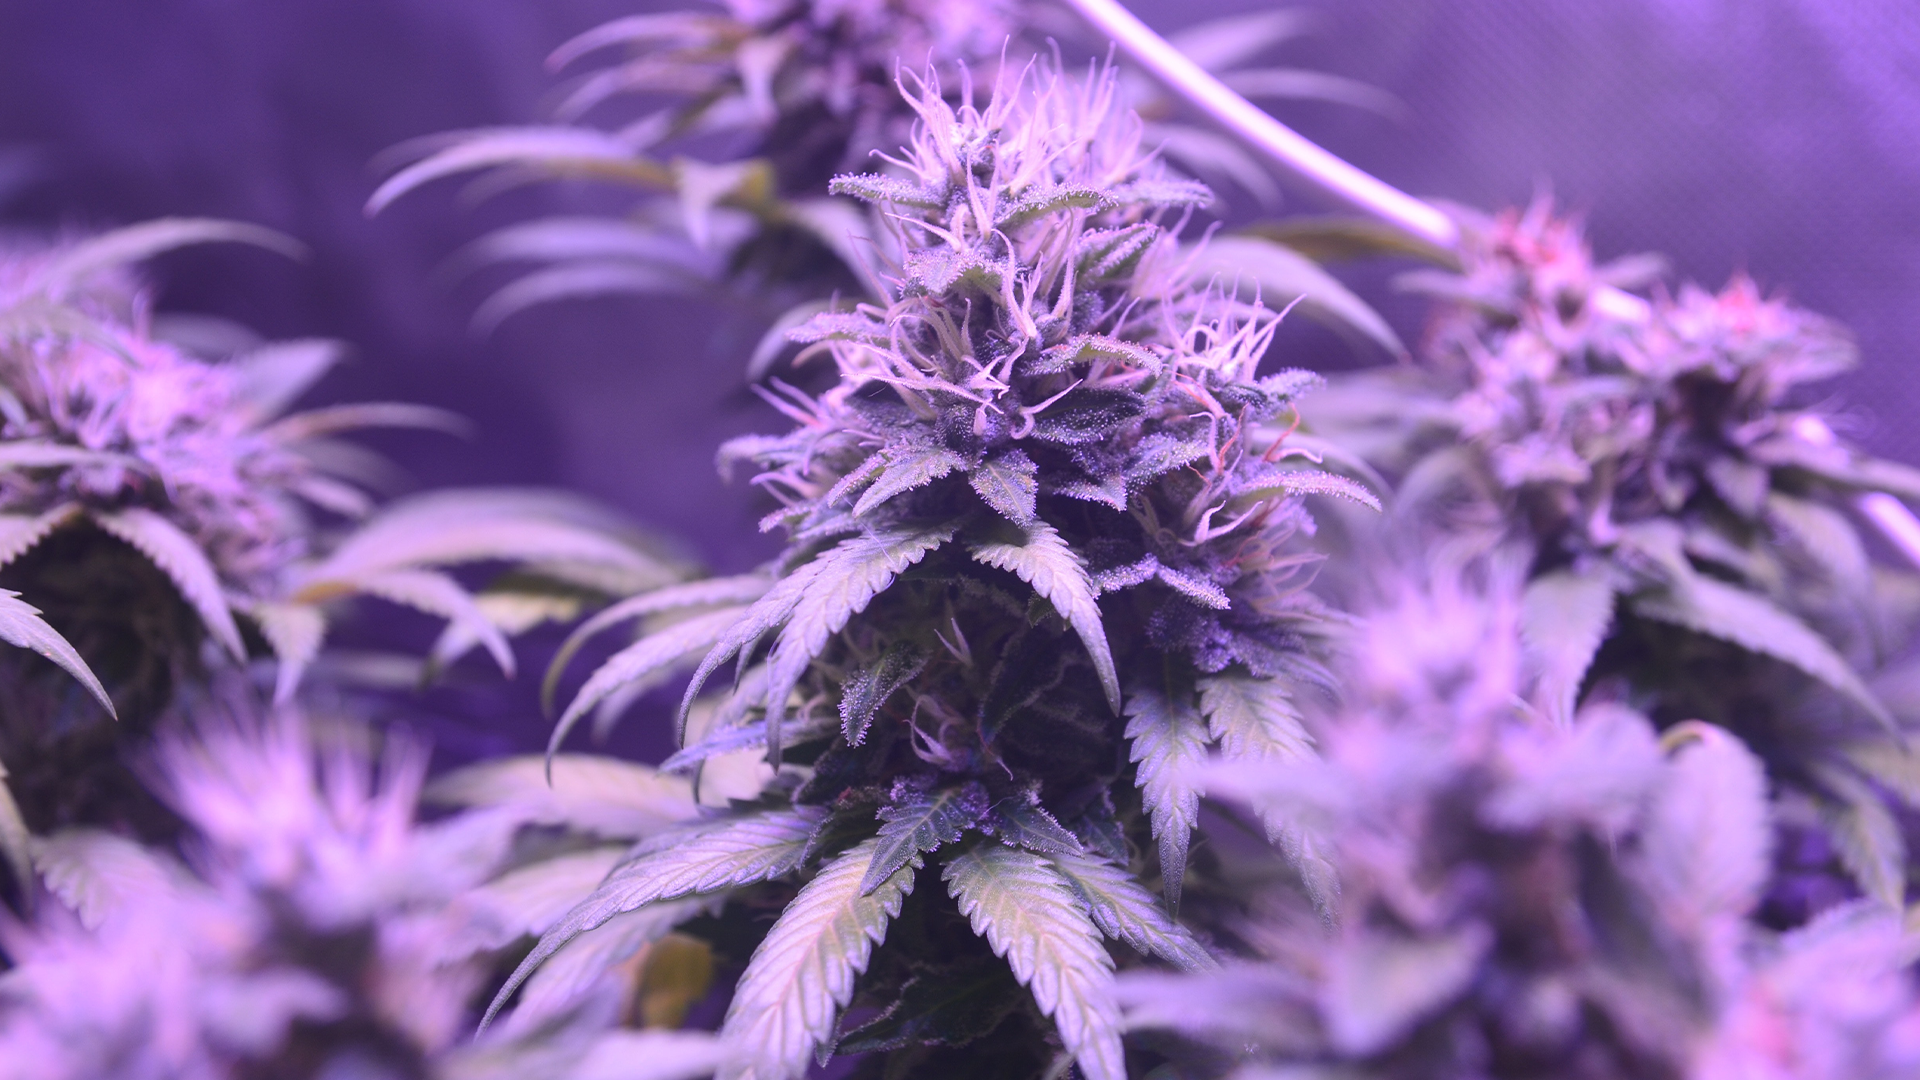 Strains that contain linalool have a taste of spice, sweet, and earthy flavors.